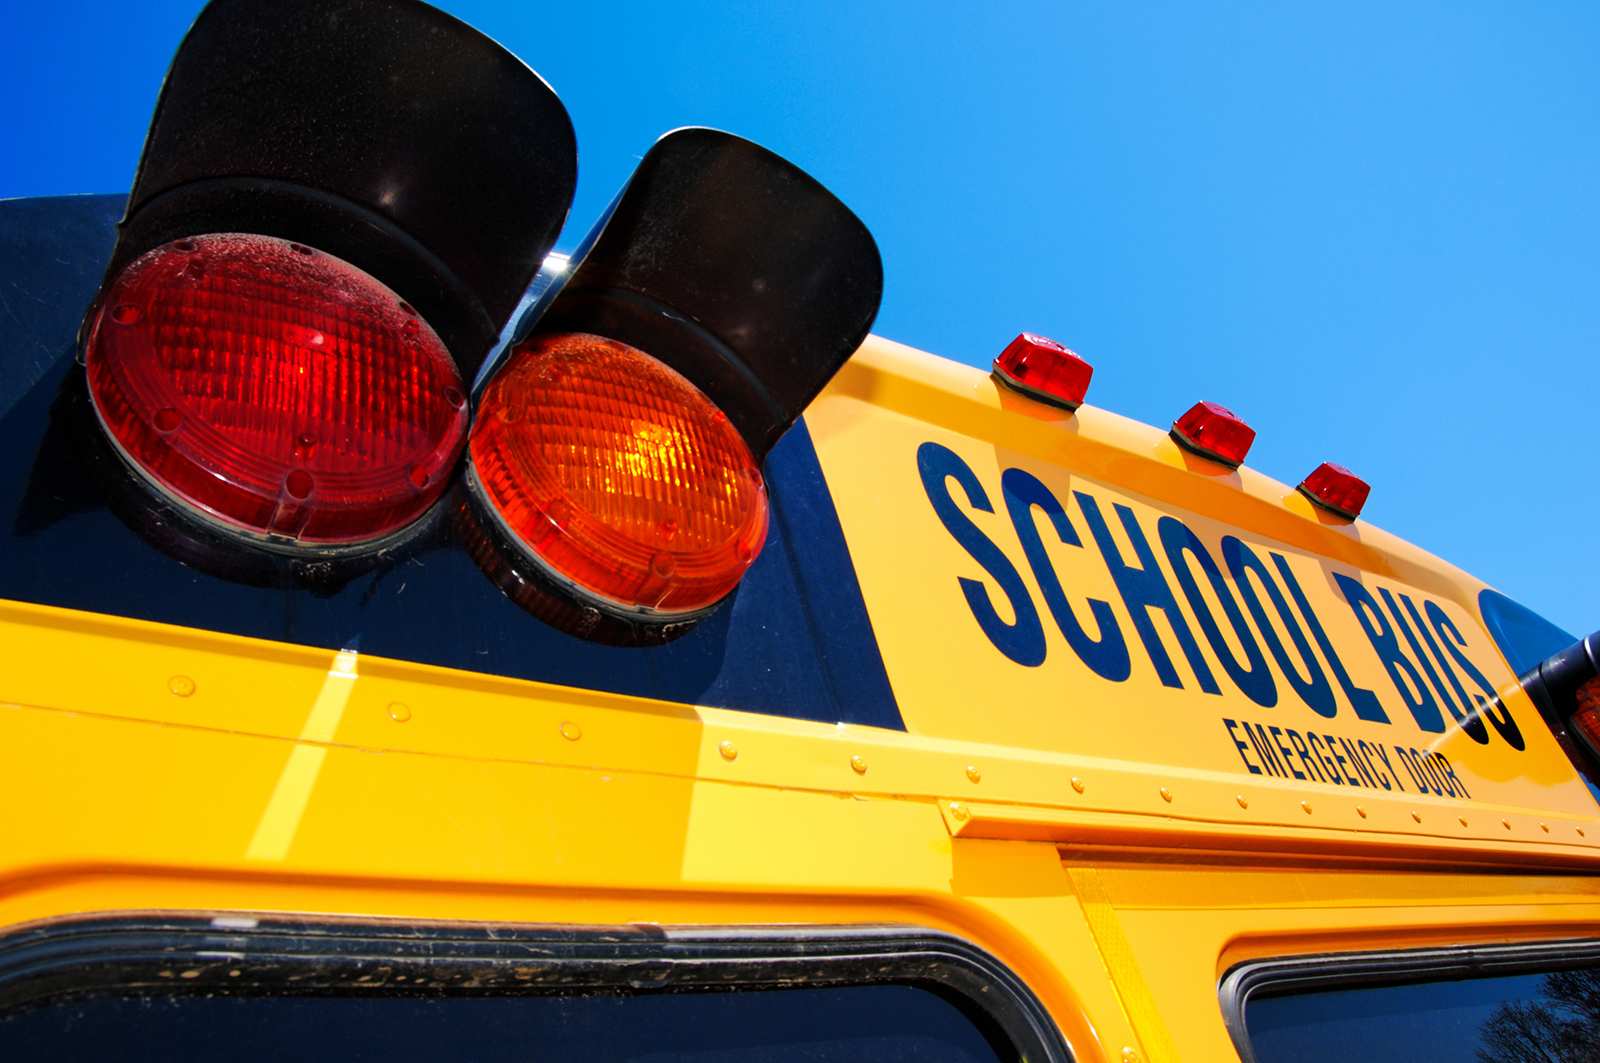 Mini school bus crashes into guardrail on Long Island, sending 4 preschoolers and 2 adults to hospital